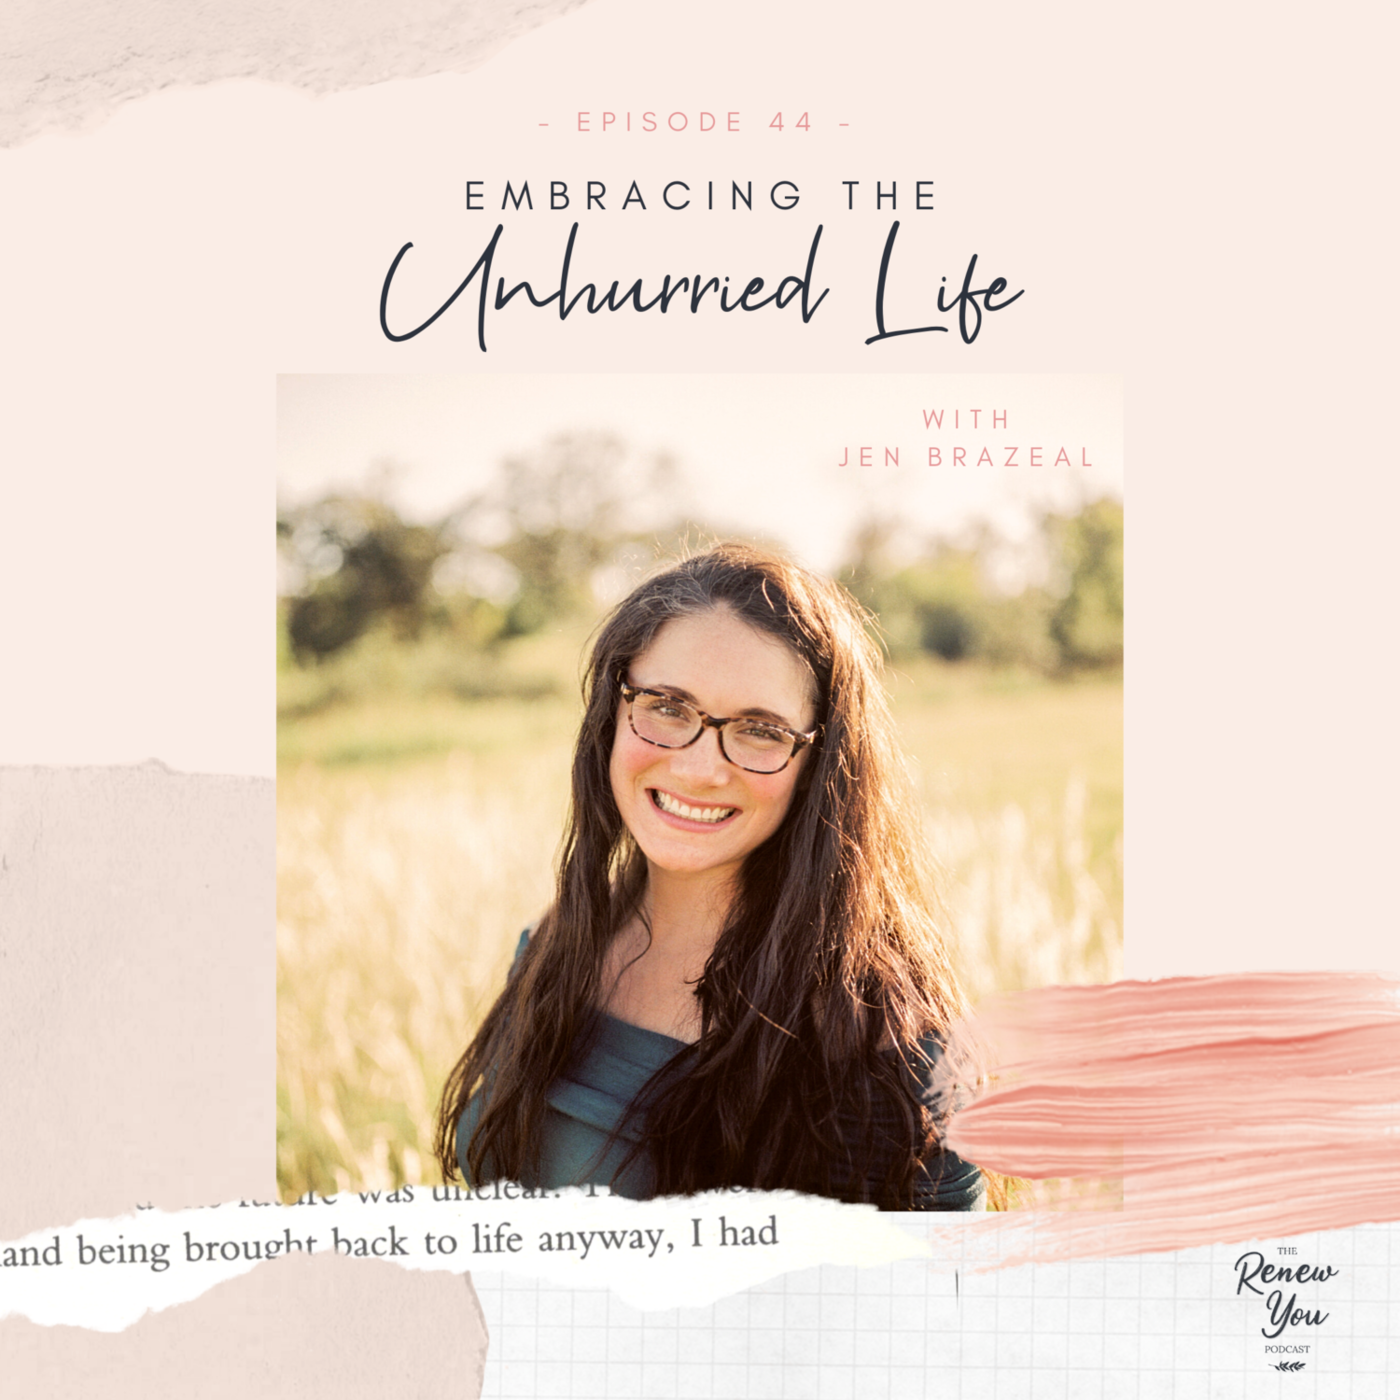 Episode 44: Embracing the Unhurried Life with Jen Brazeal